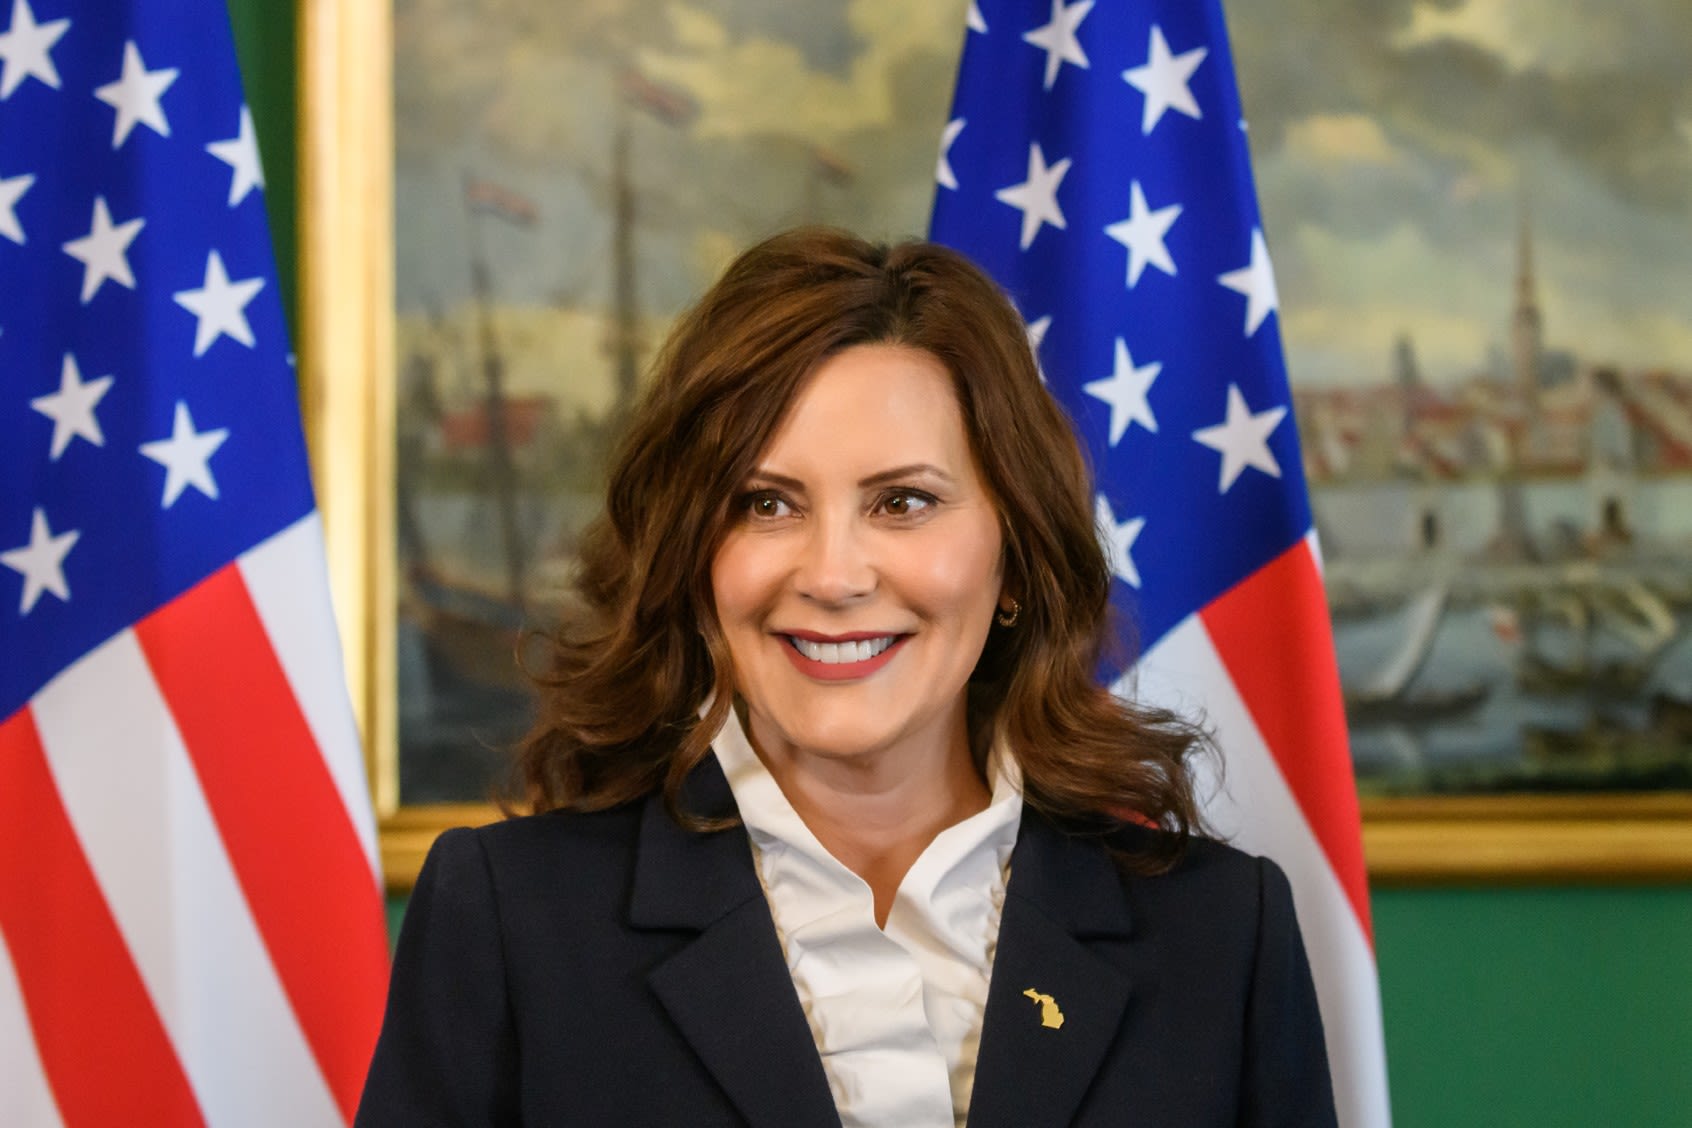 Gretchen Whitmer eyed as possible replacement for Biden, should he step down